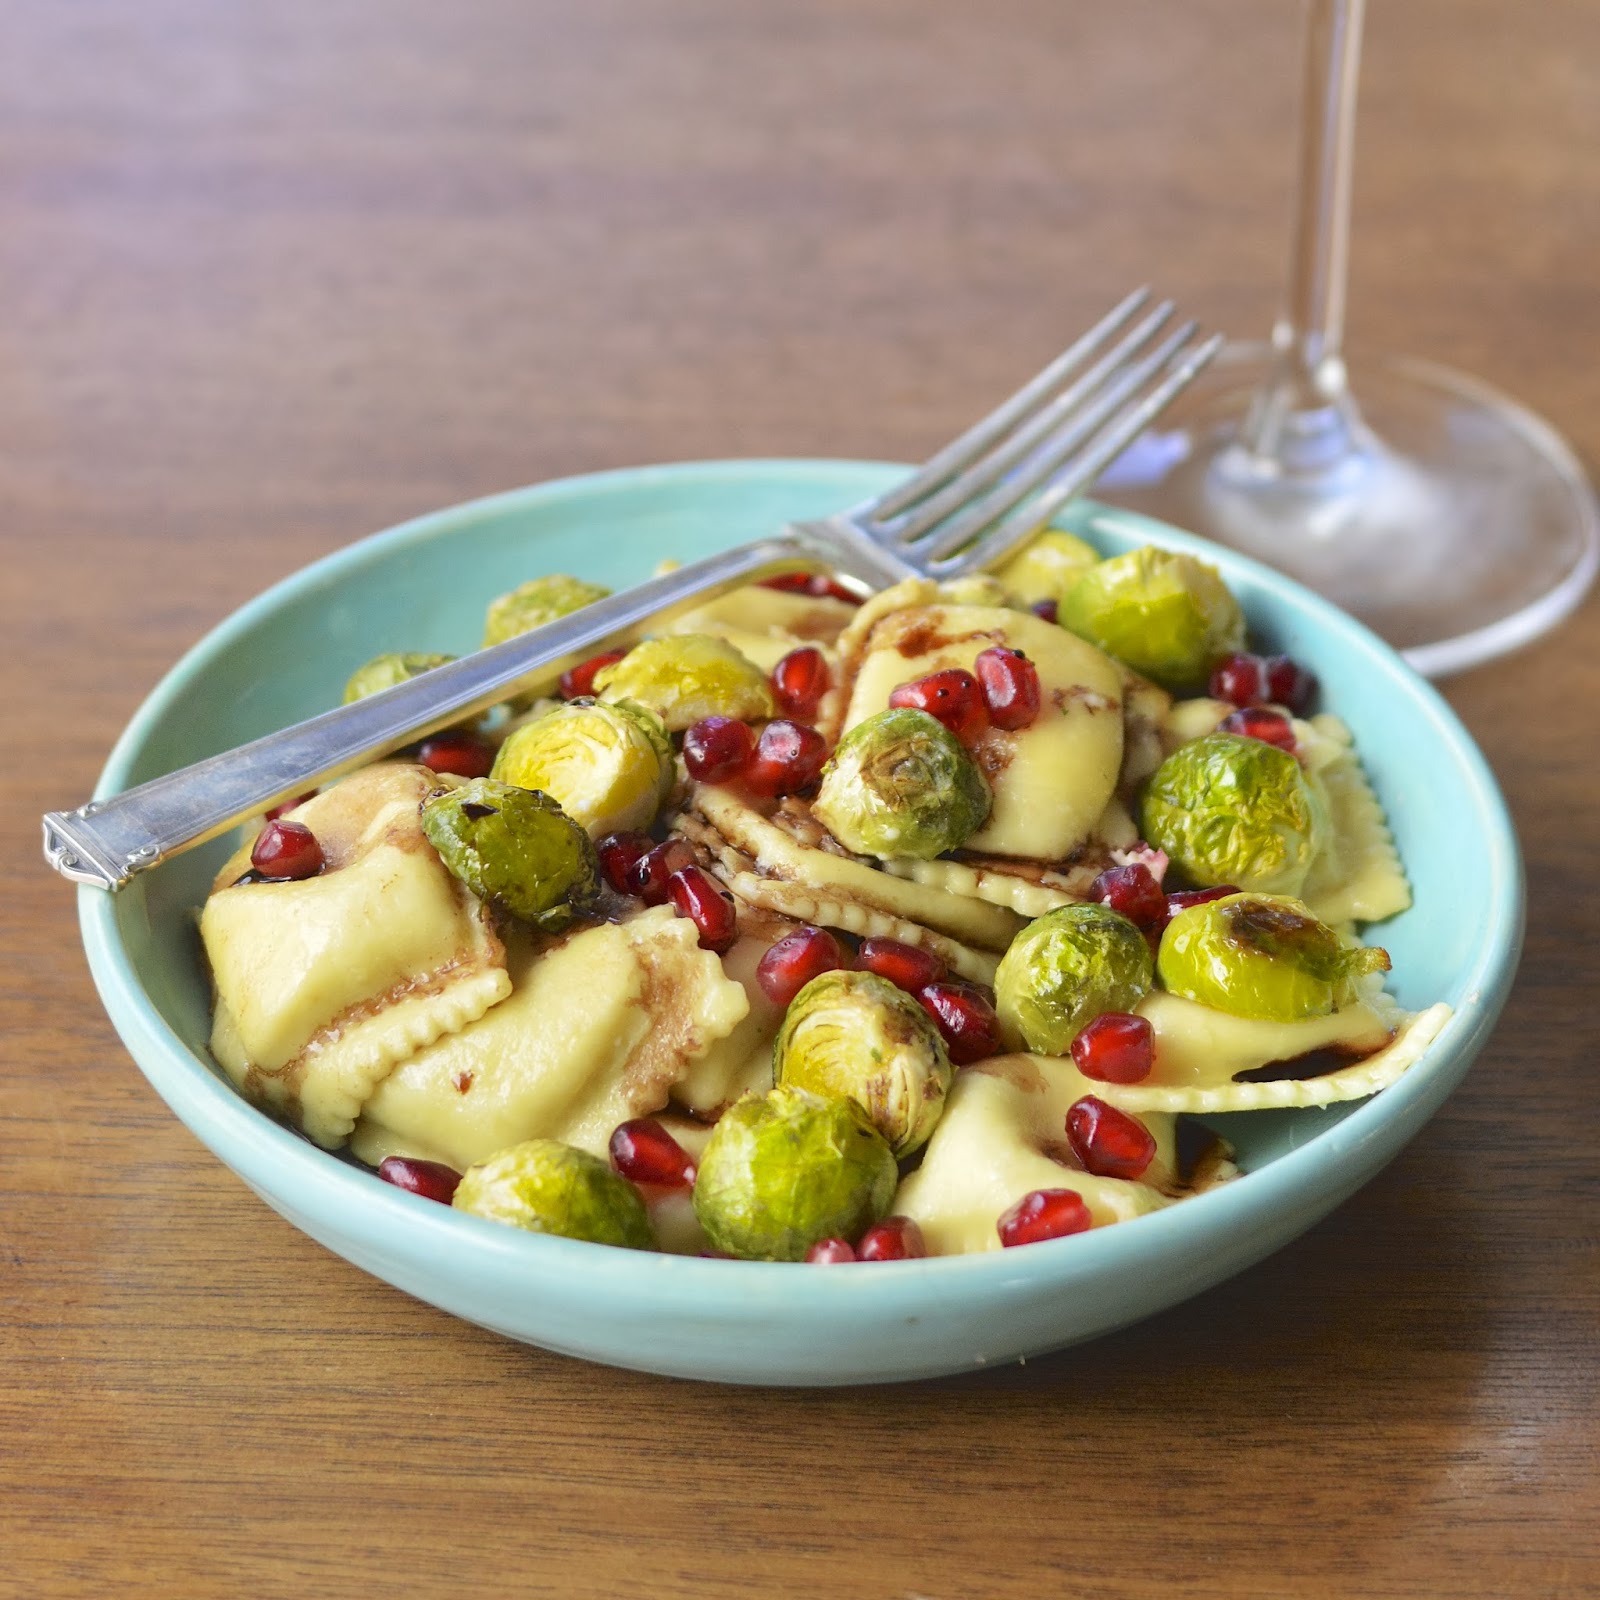 Cheese Ravioli with Sautéed Brussels Sprouts - Serving Dumplings